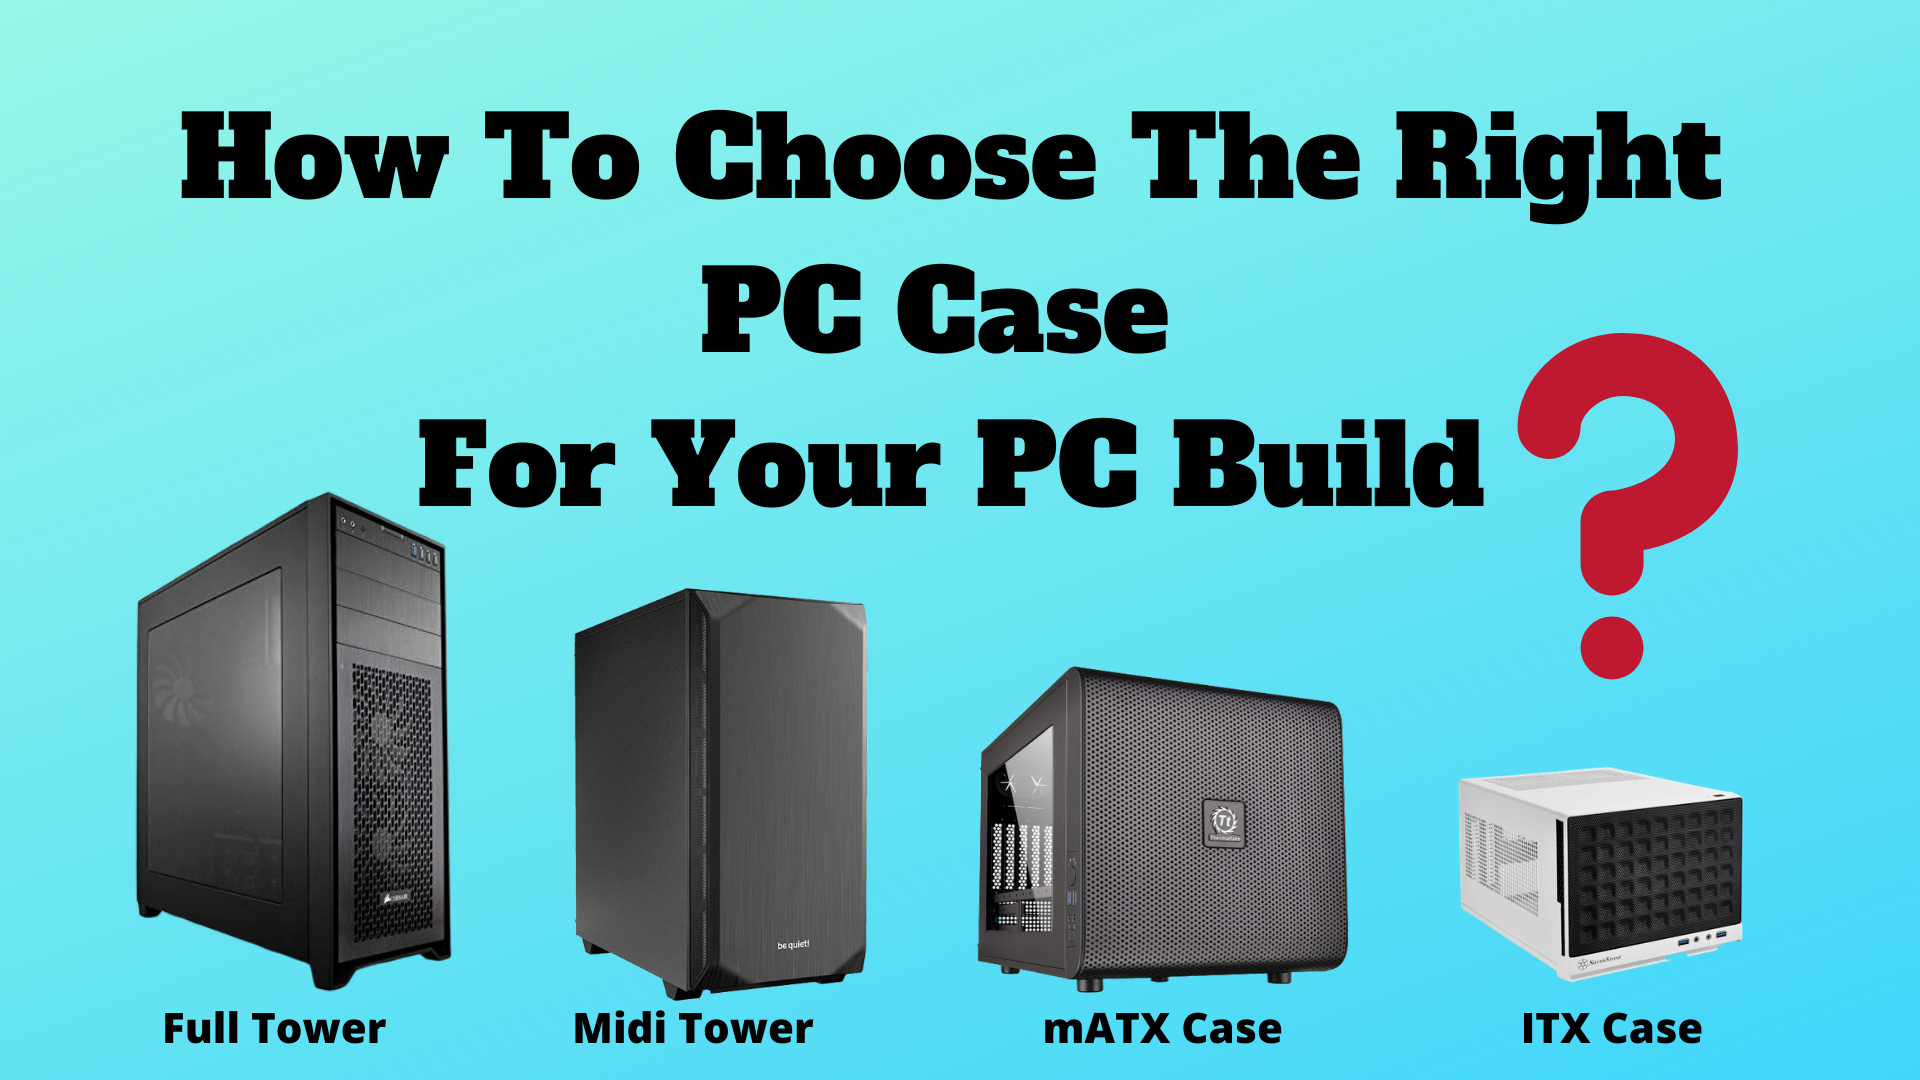 How To Choose The Right PC Case For Your PC Build